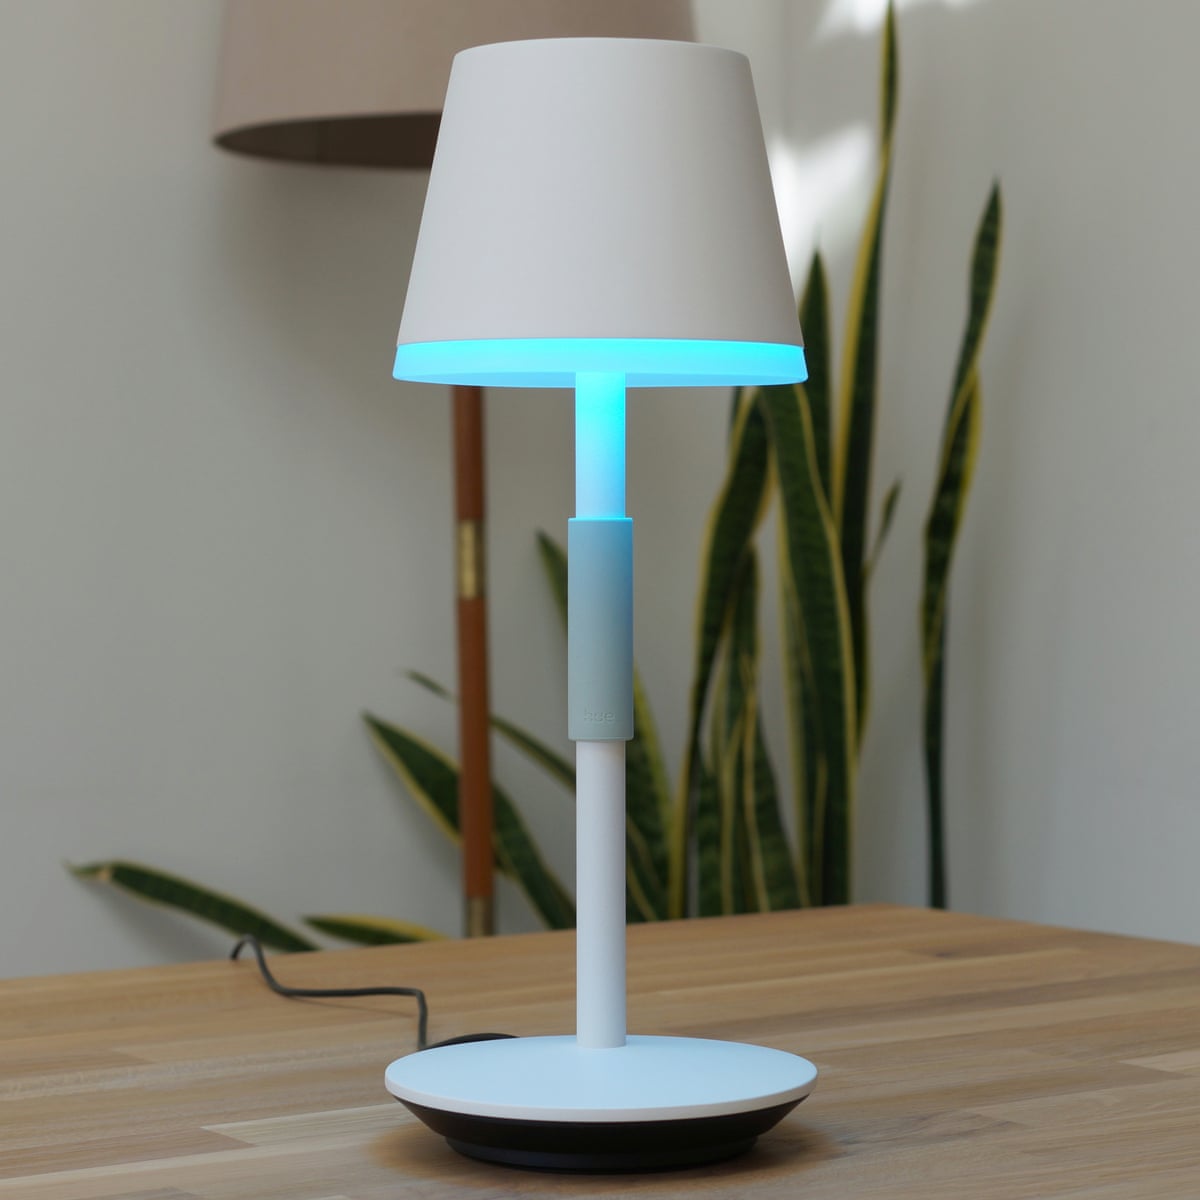 Philips Hue Go table lamp review: battery-powered smart light for indoors  or out, Smart homes